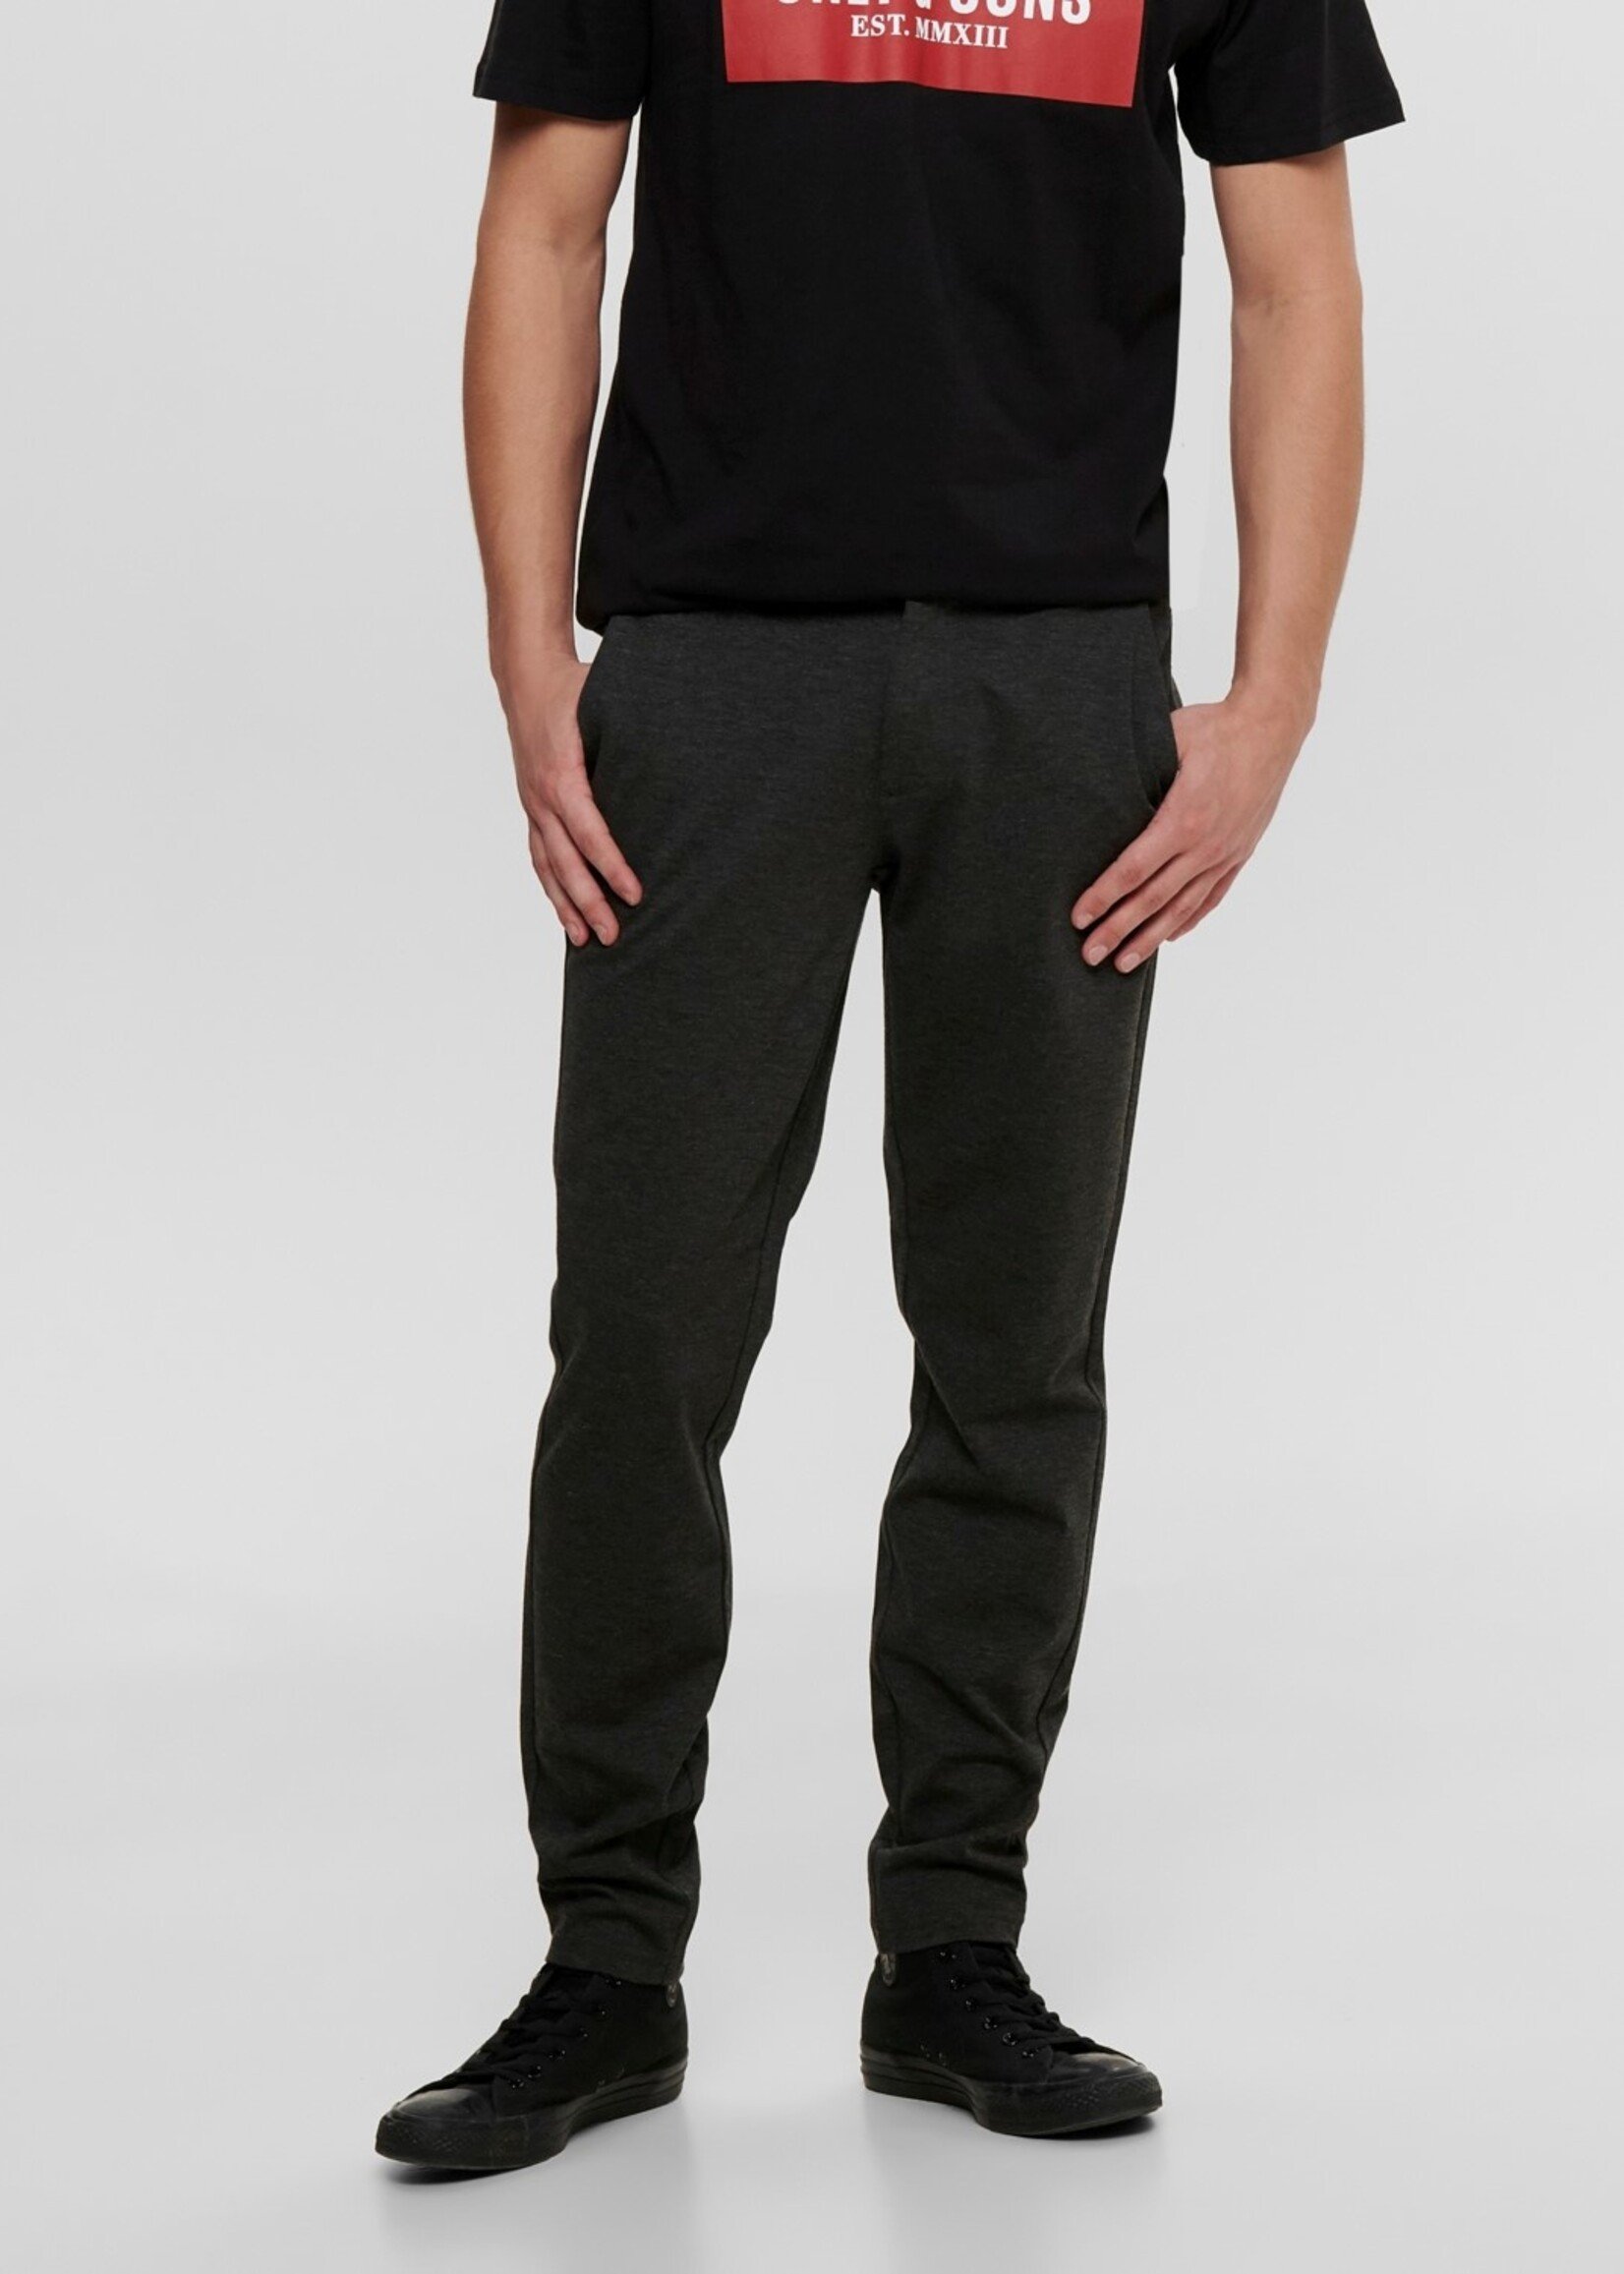 Only & Sons Only & Sons Pantalon Donkergrijs